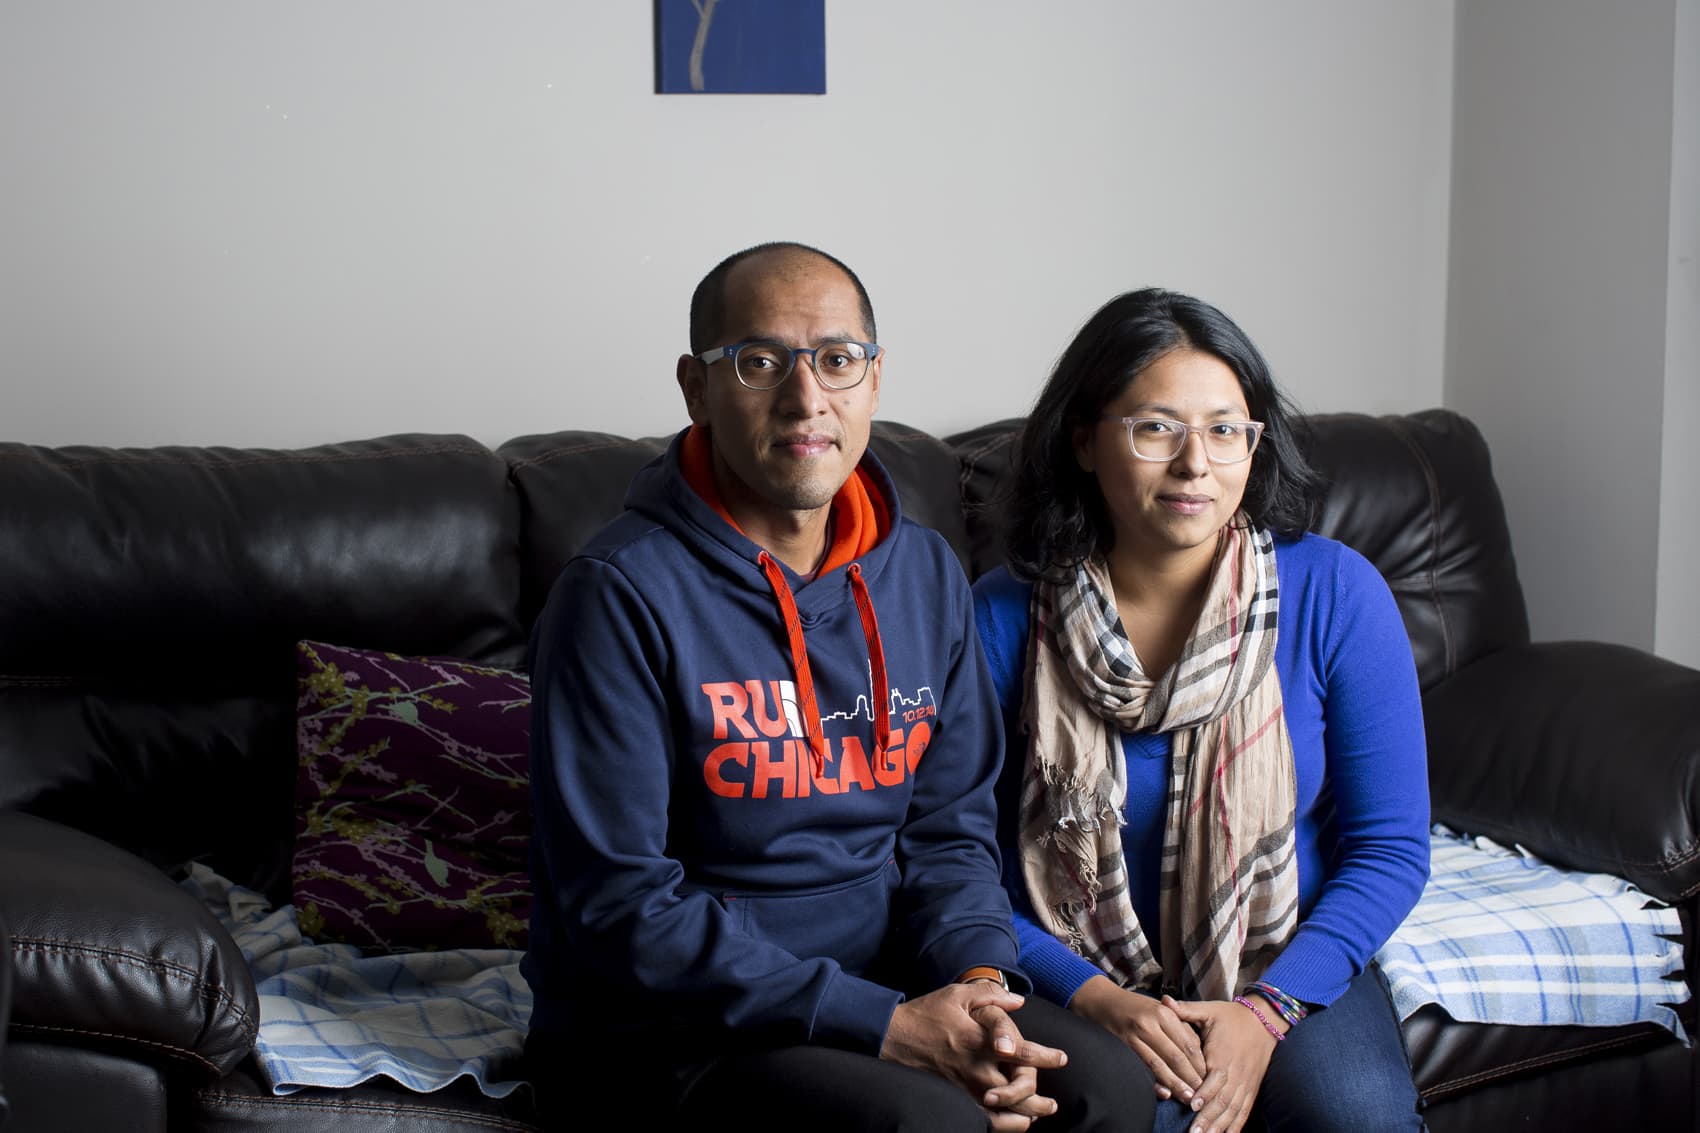 Cristian Mendoza and Laura Mendoza pictured in the home they bought for their parents in Humboldt Park on Nov. 6, 2017, in Chicago. (Michelle Kanaar for Here & Now)